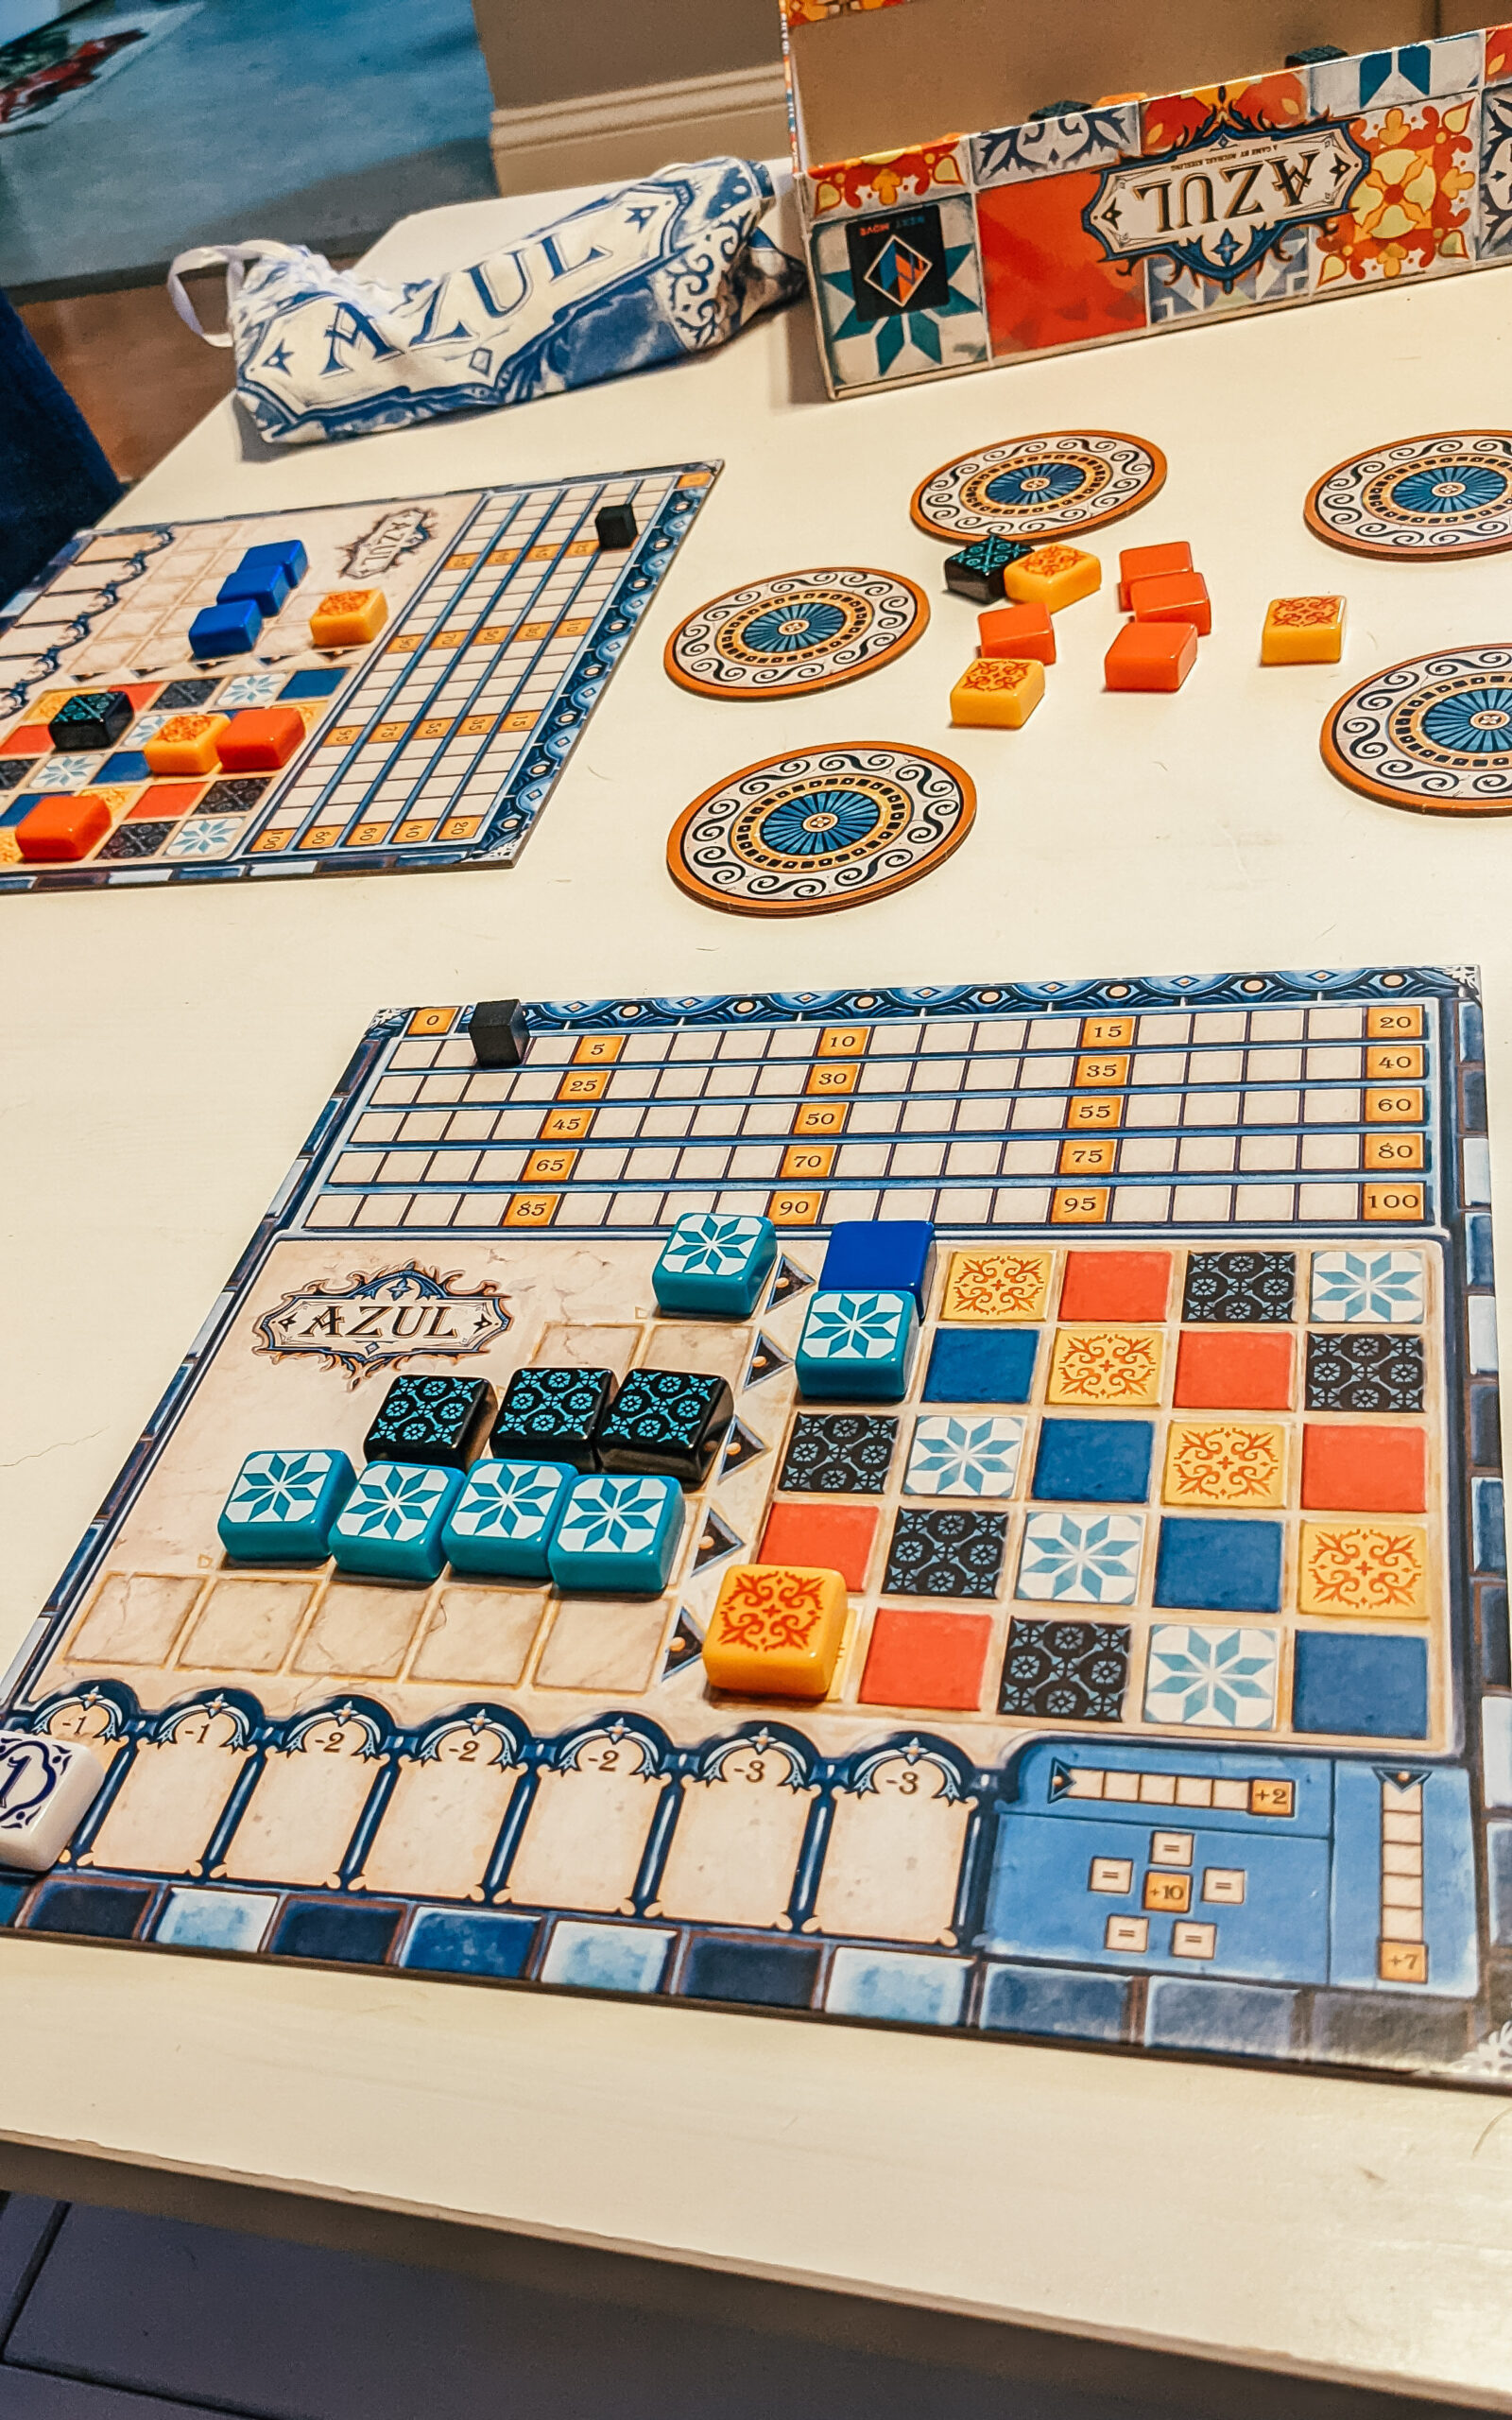 while table with board game Azul